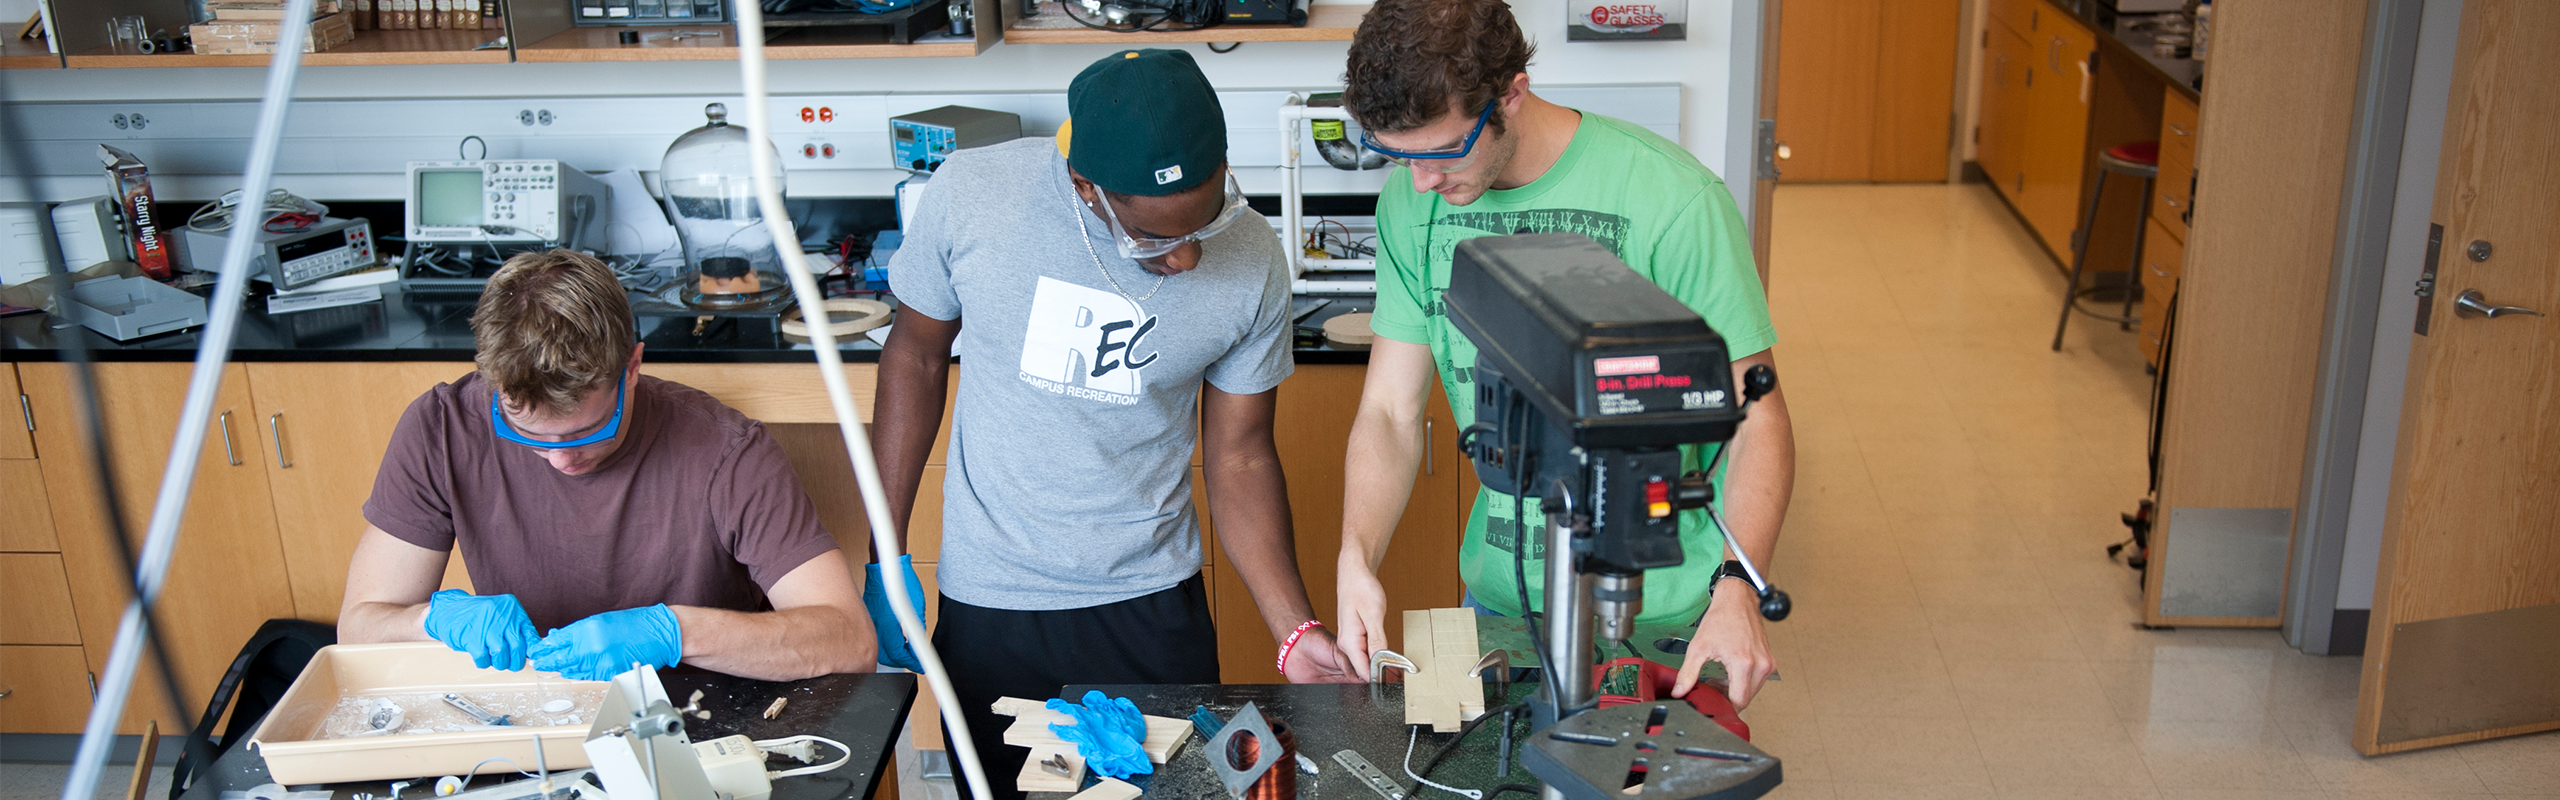 Students in Elon's engineering programs design parts for a prototype in the Hampl Engineering Workshop